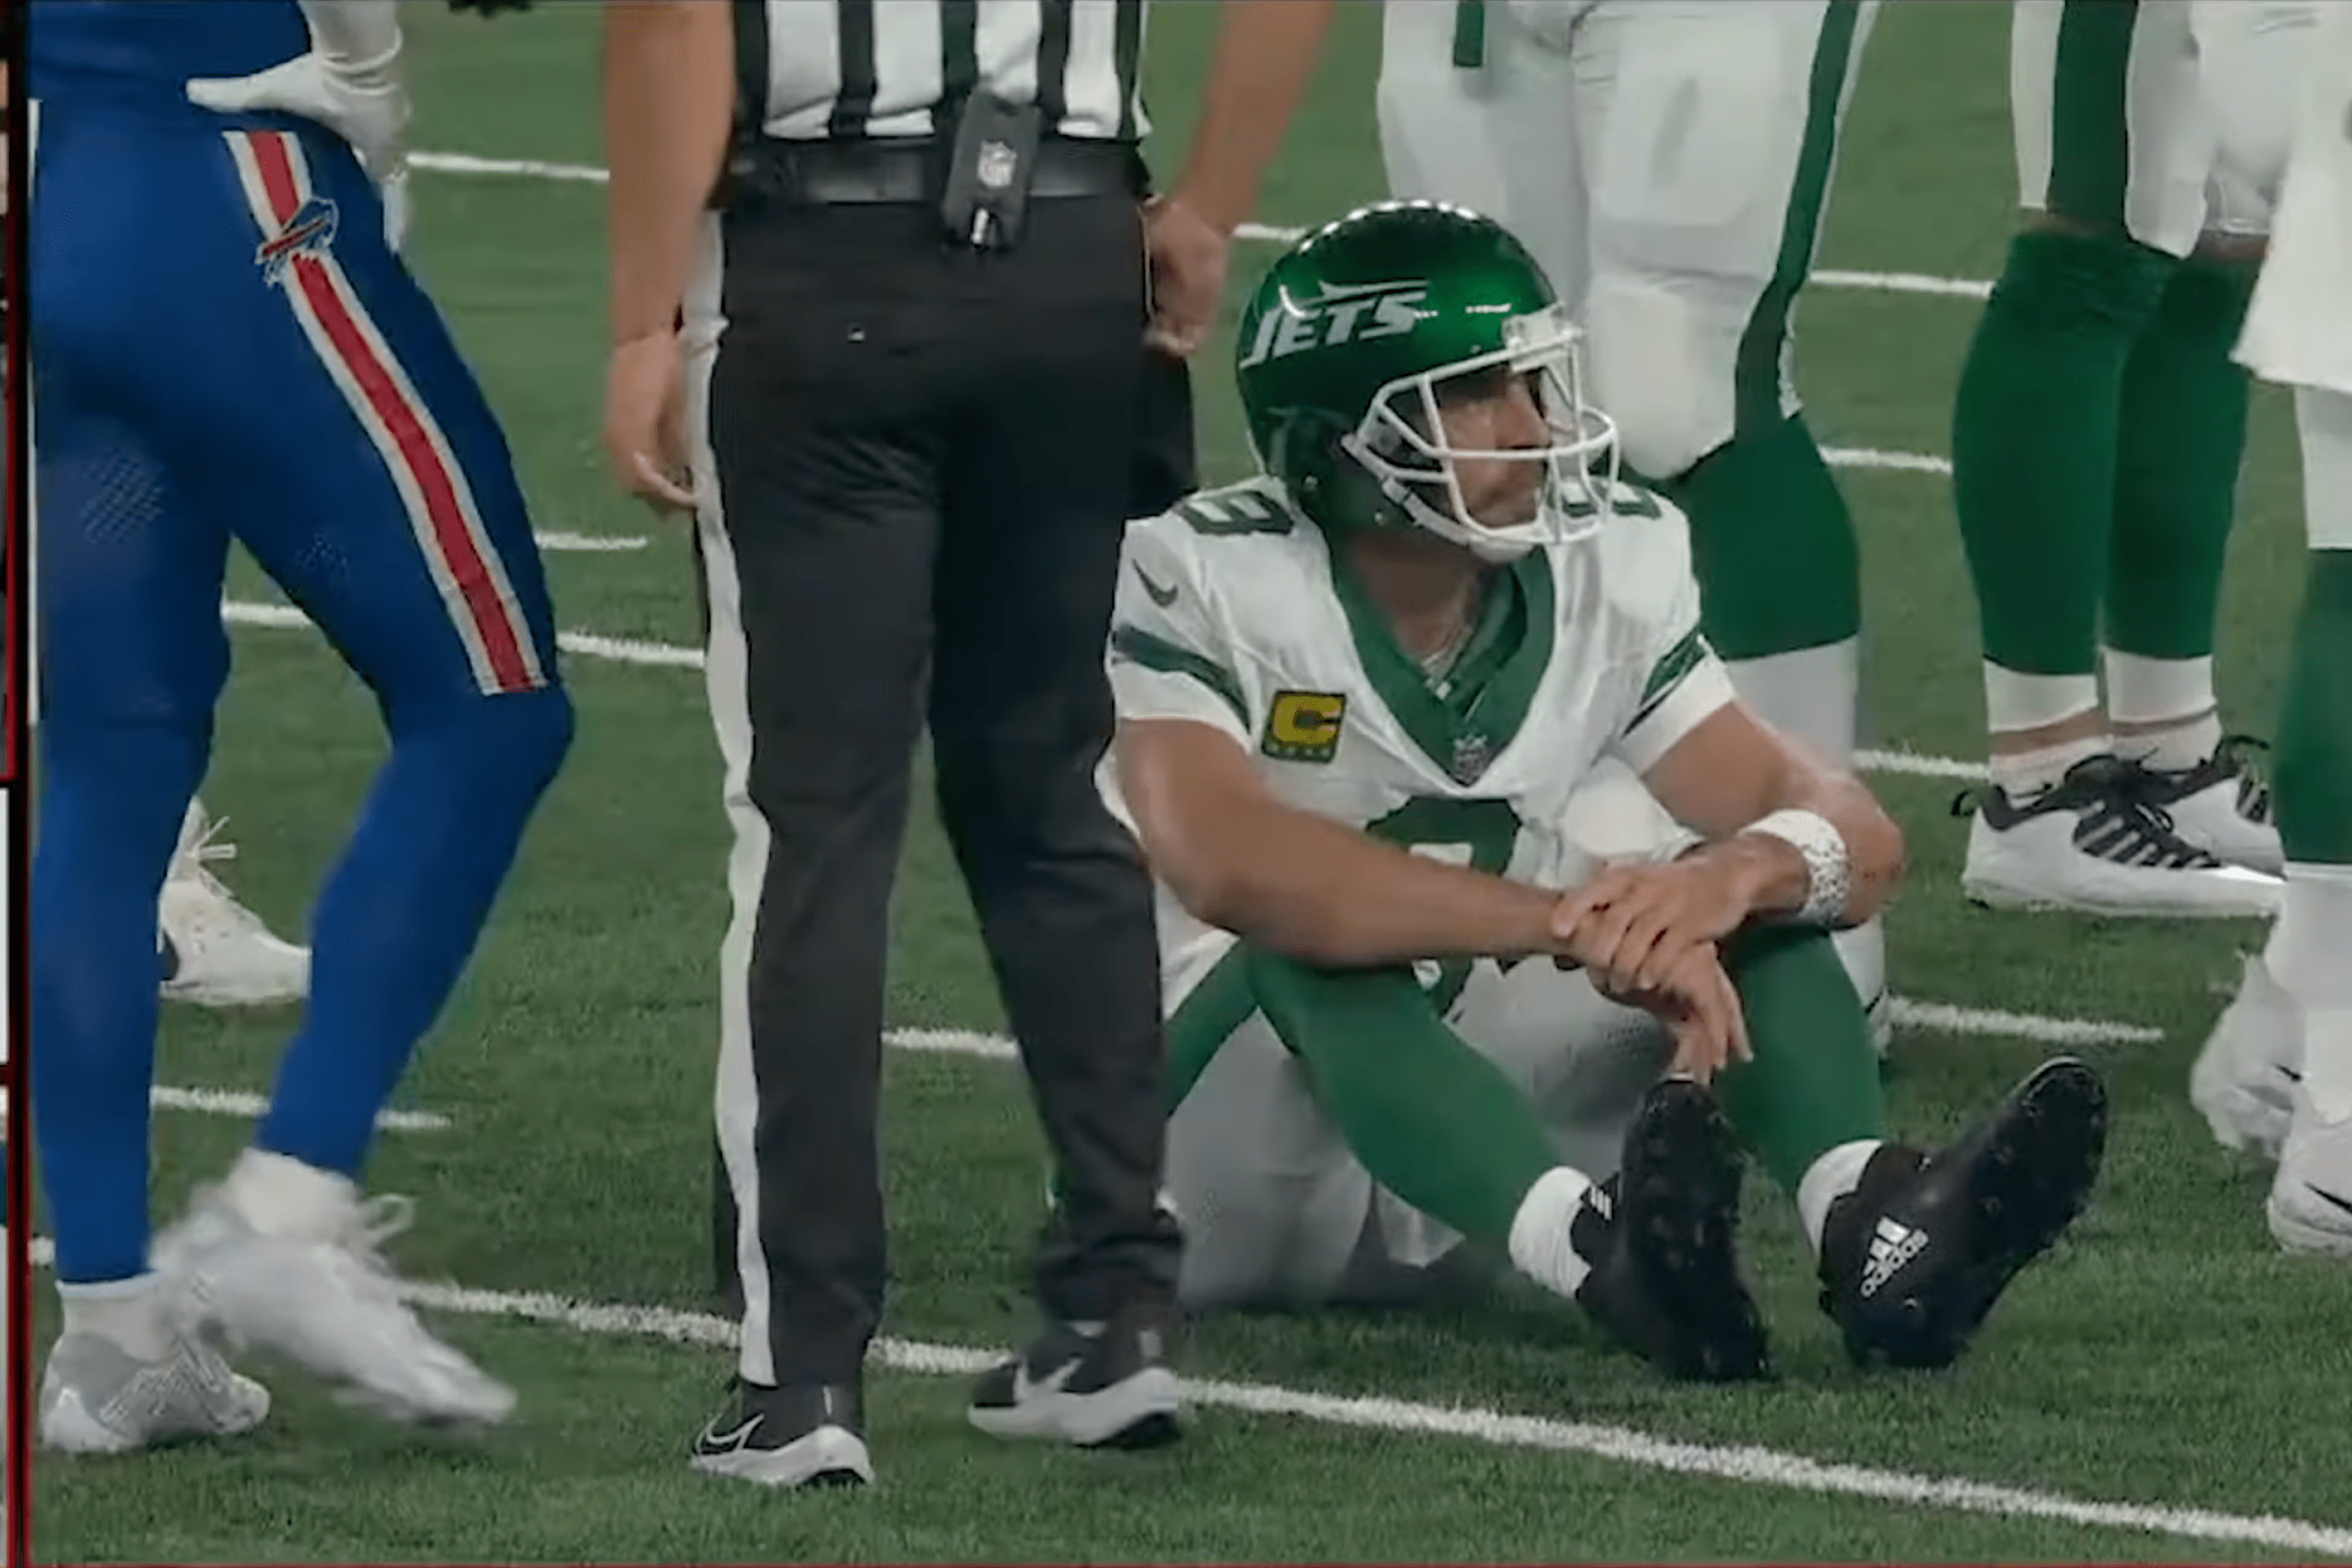 A screenshot of the Manningcast reacting to Aaaron Rodgers's injury